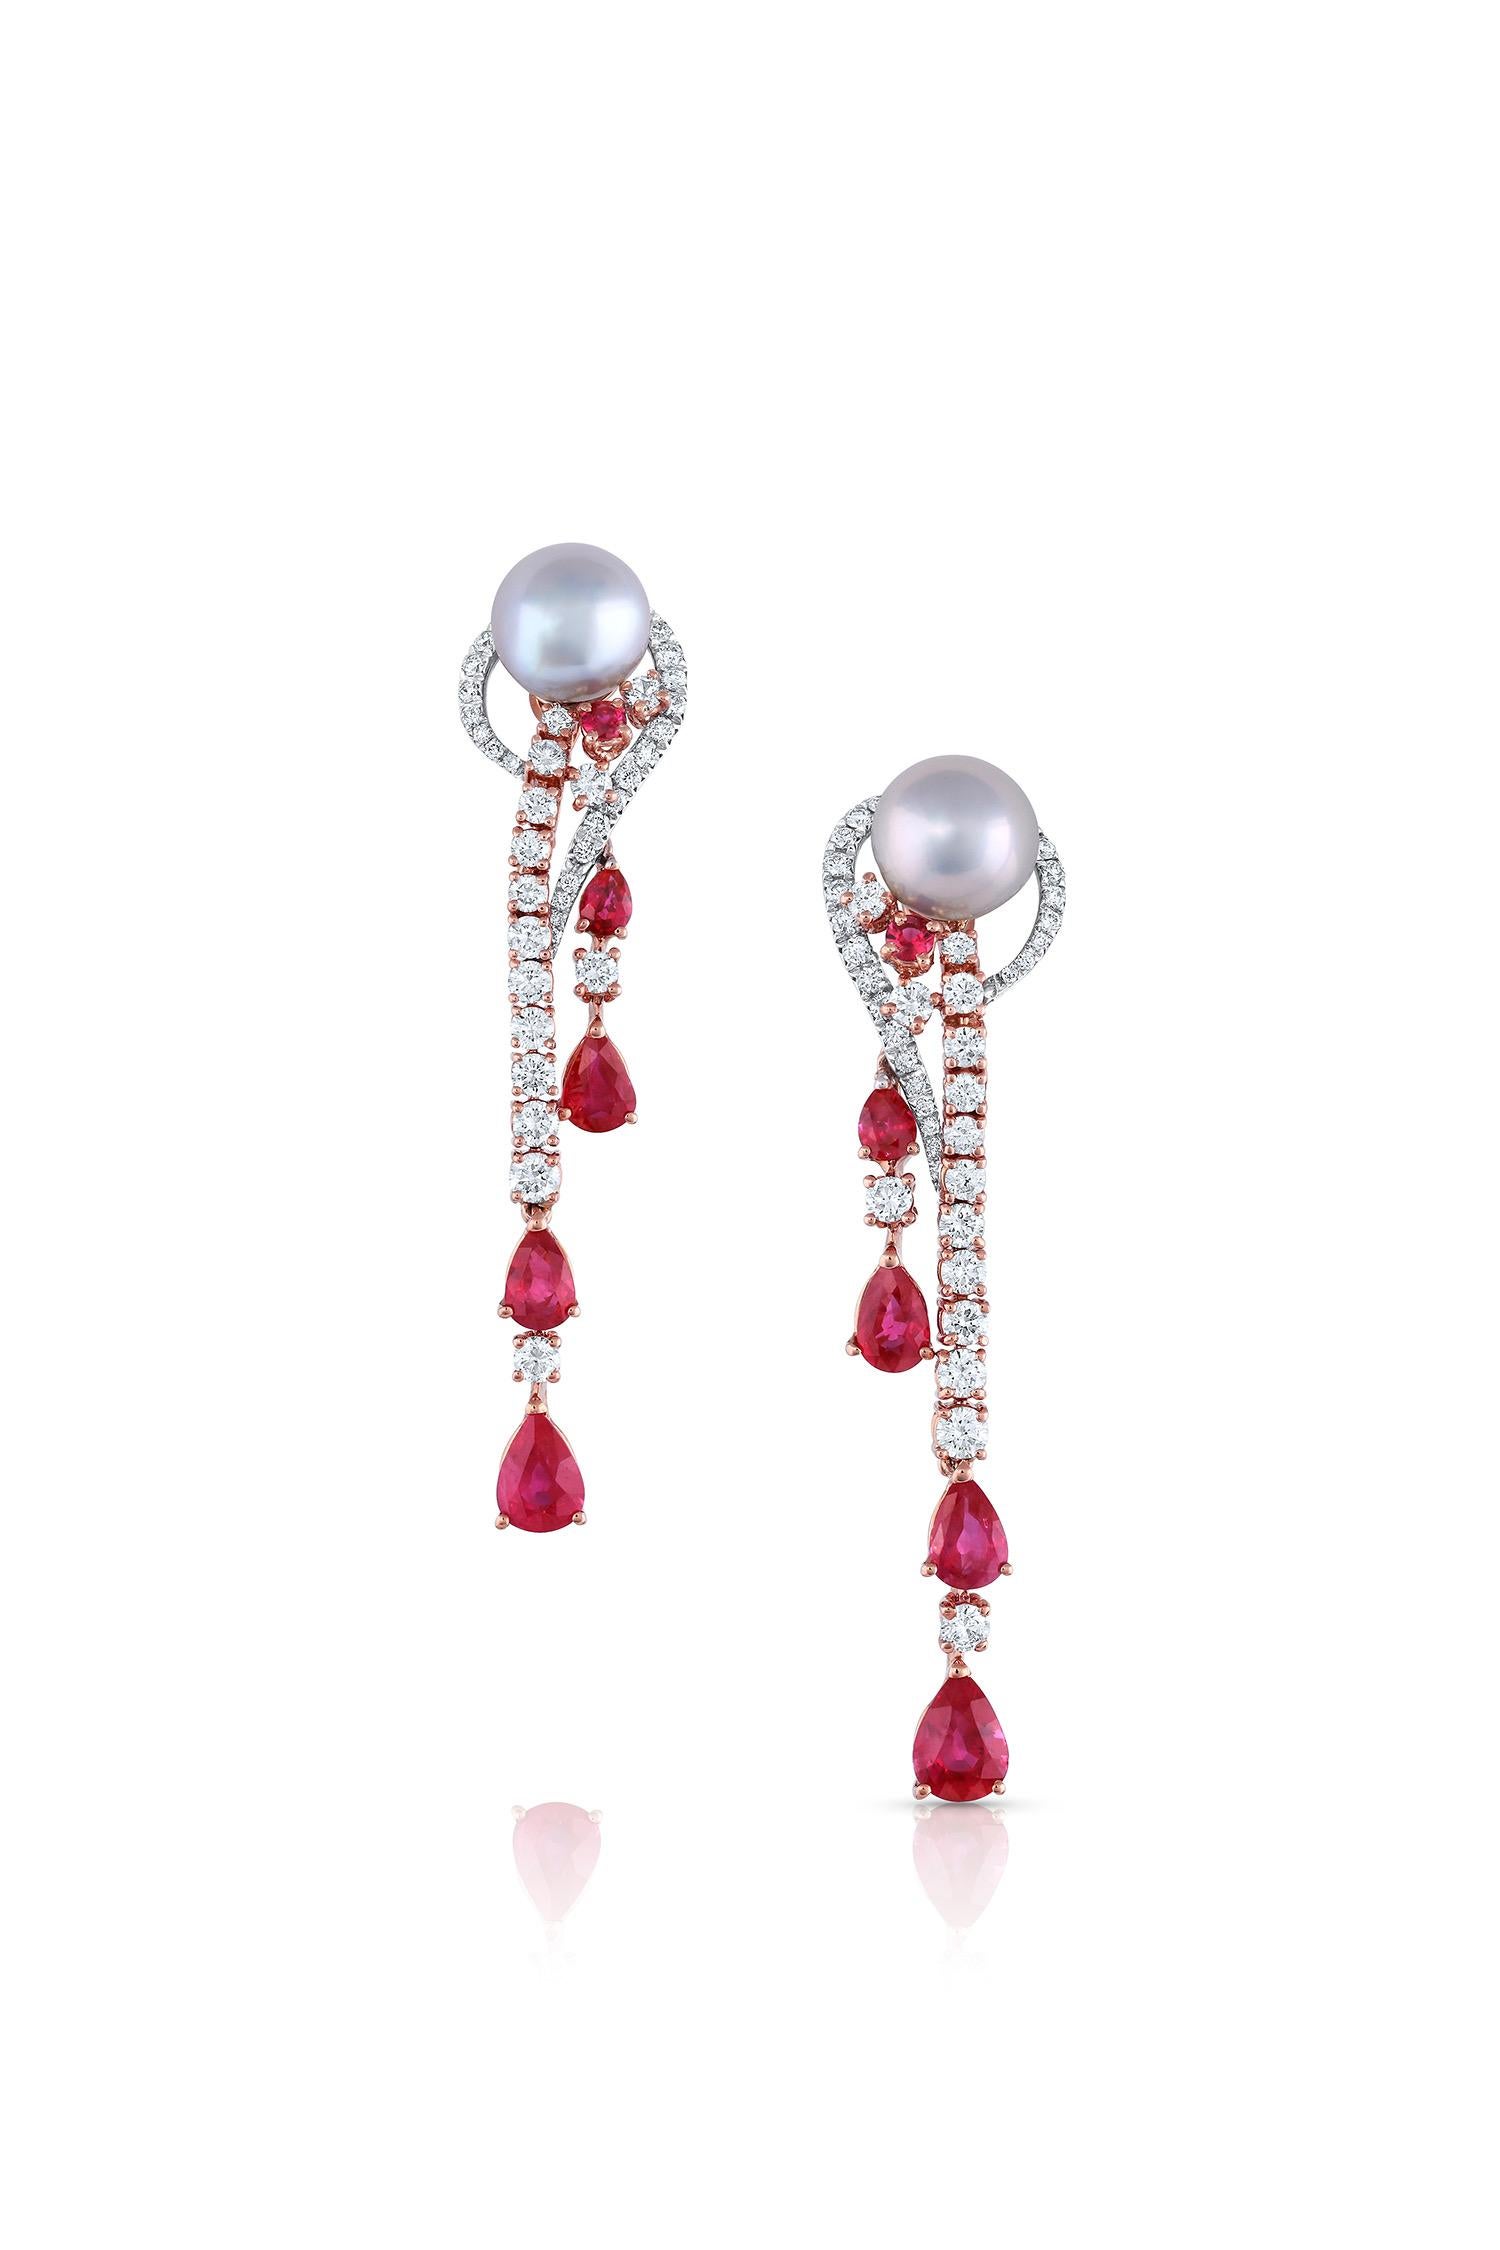 Pear Cut Contemporary Akoya Pearls & Ruby Earrings in 18K White Gold  For Sale